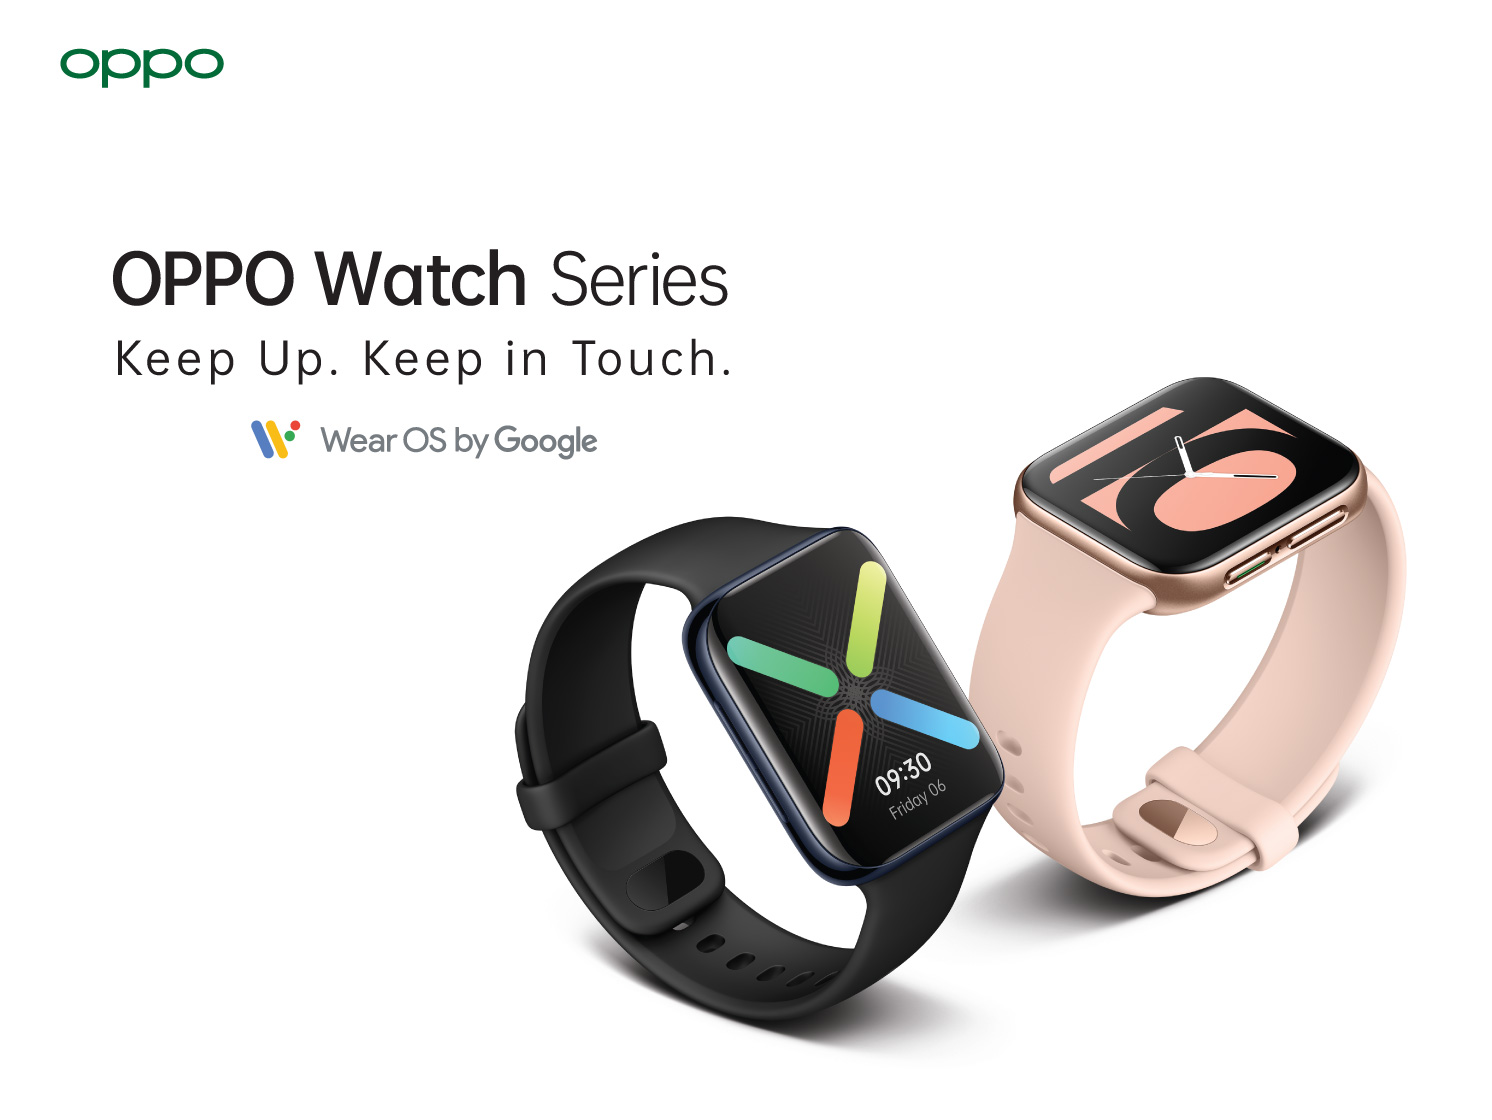 OPPO Watch Makes Its Debut with Built-in Cellular and Flexible